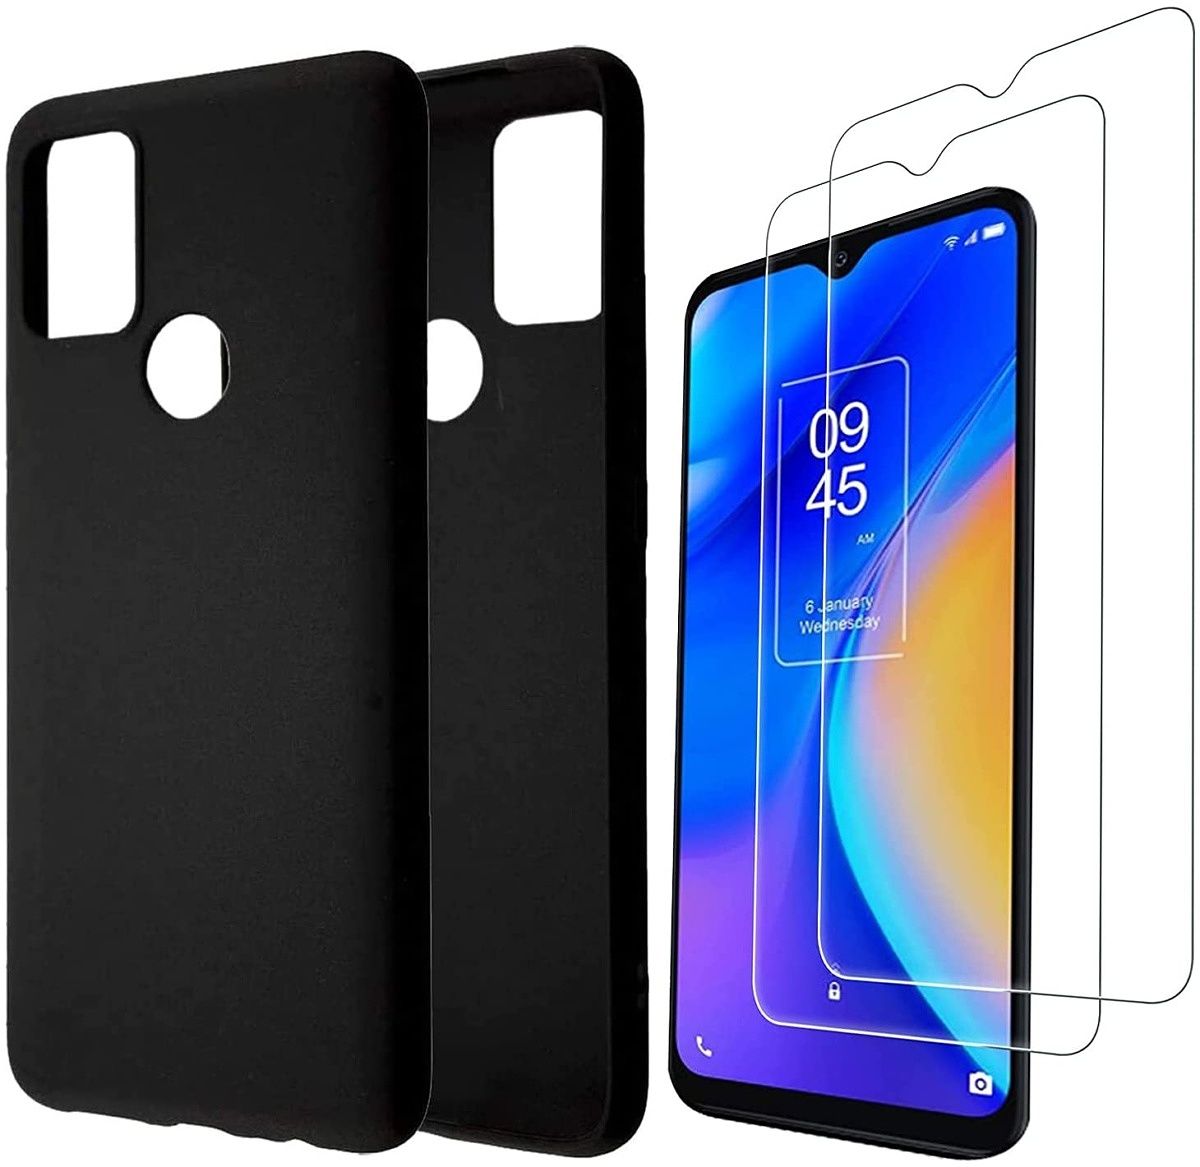 If you’re looking for both a screen protector and a case for your new TCL phone, this Miside combo is a decent option. You’ll get a soft TPU case and two tempered glass protectors. The screen protectors have a case friendly design.